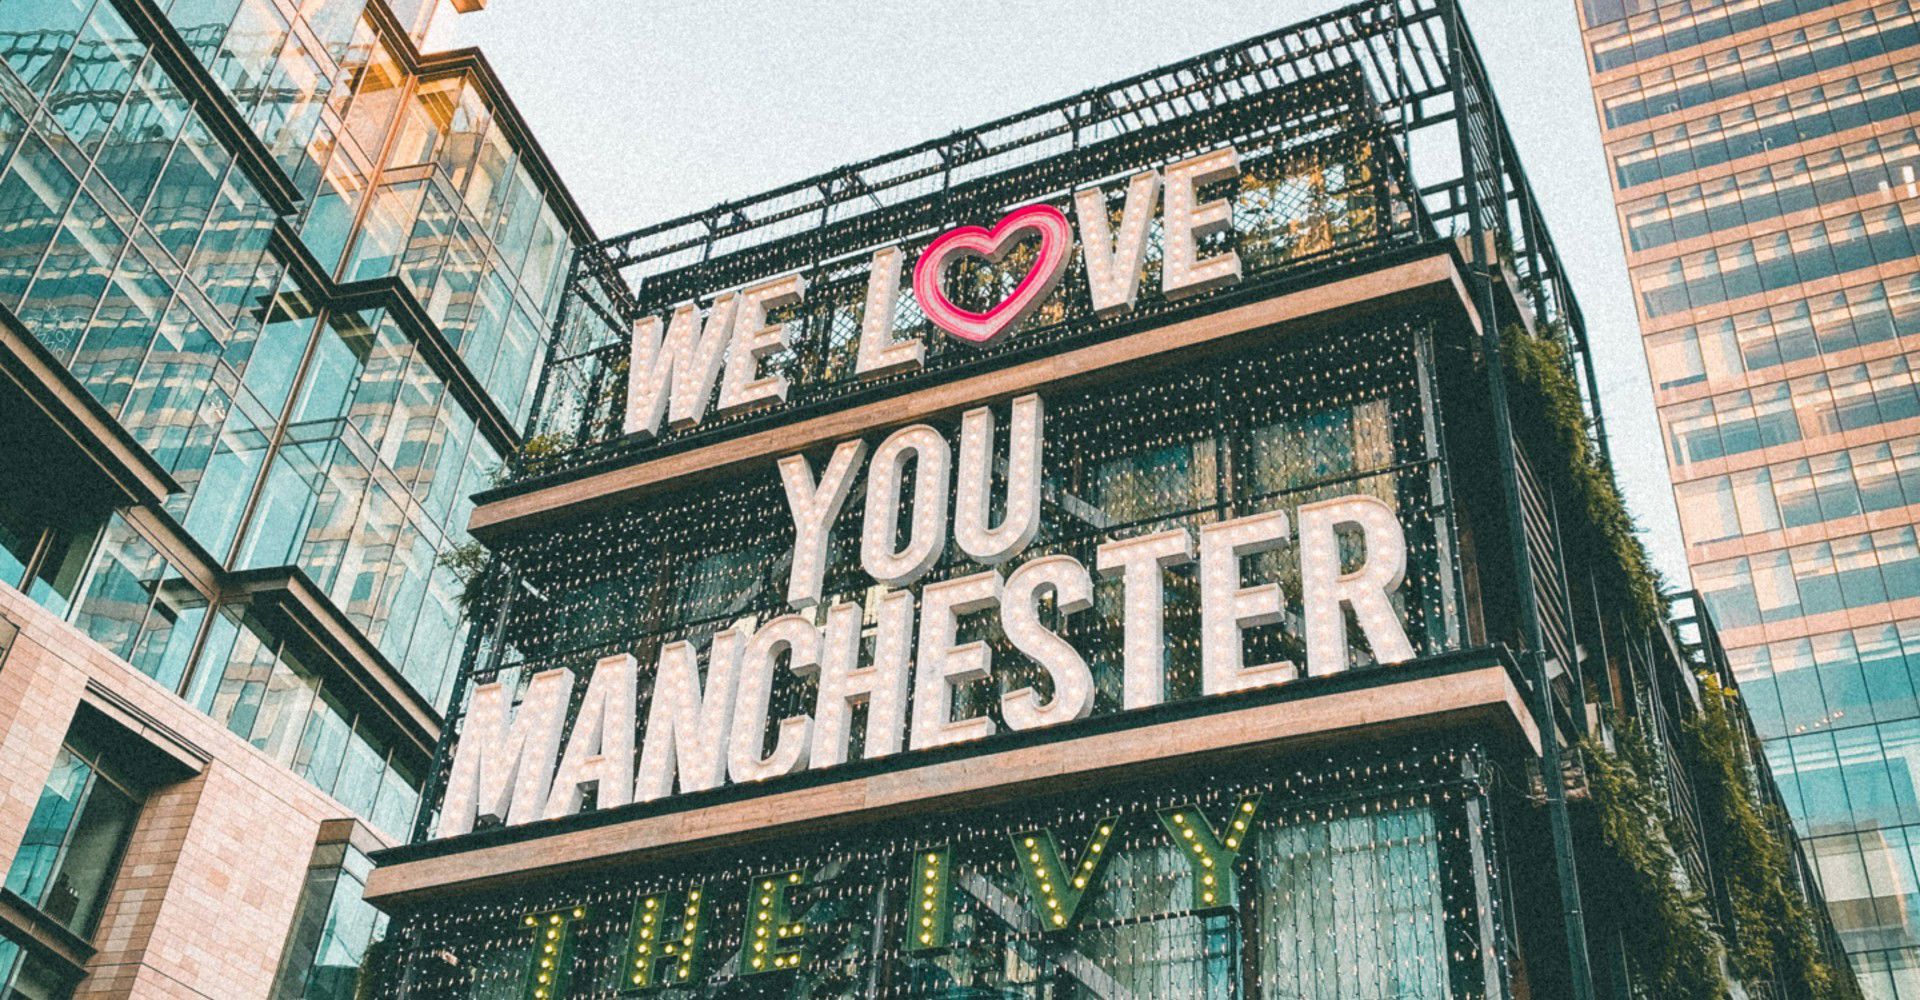 We Love You Manchester the IVY